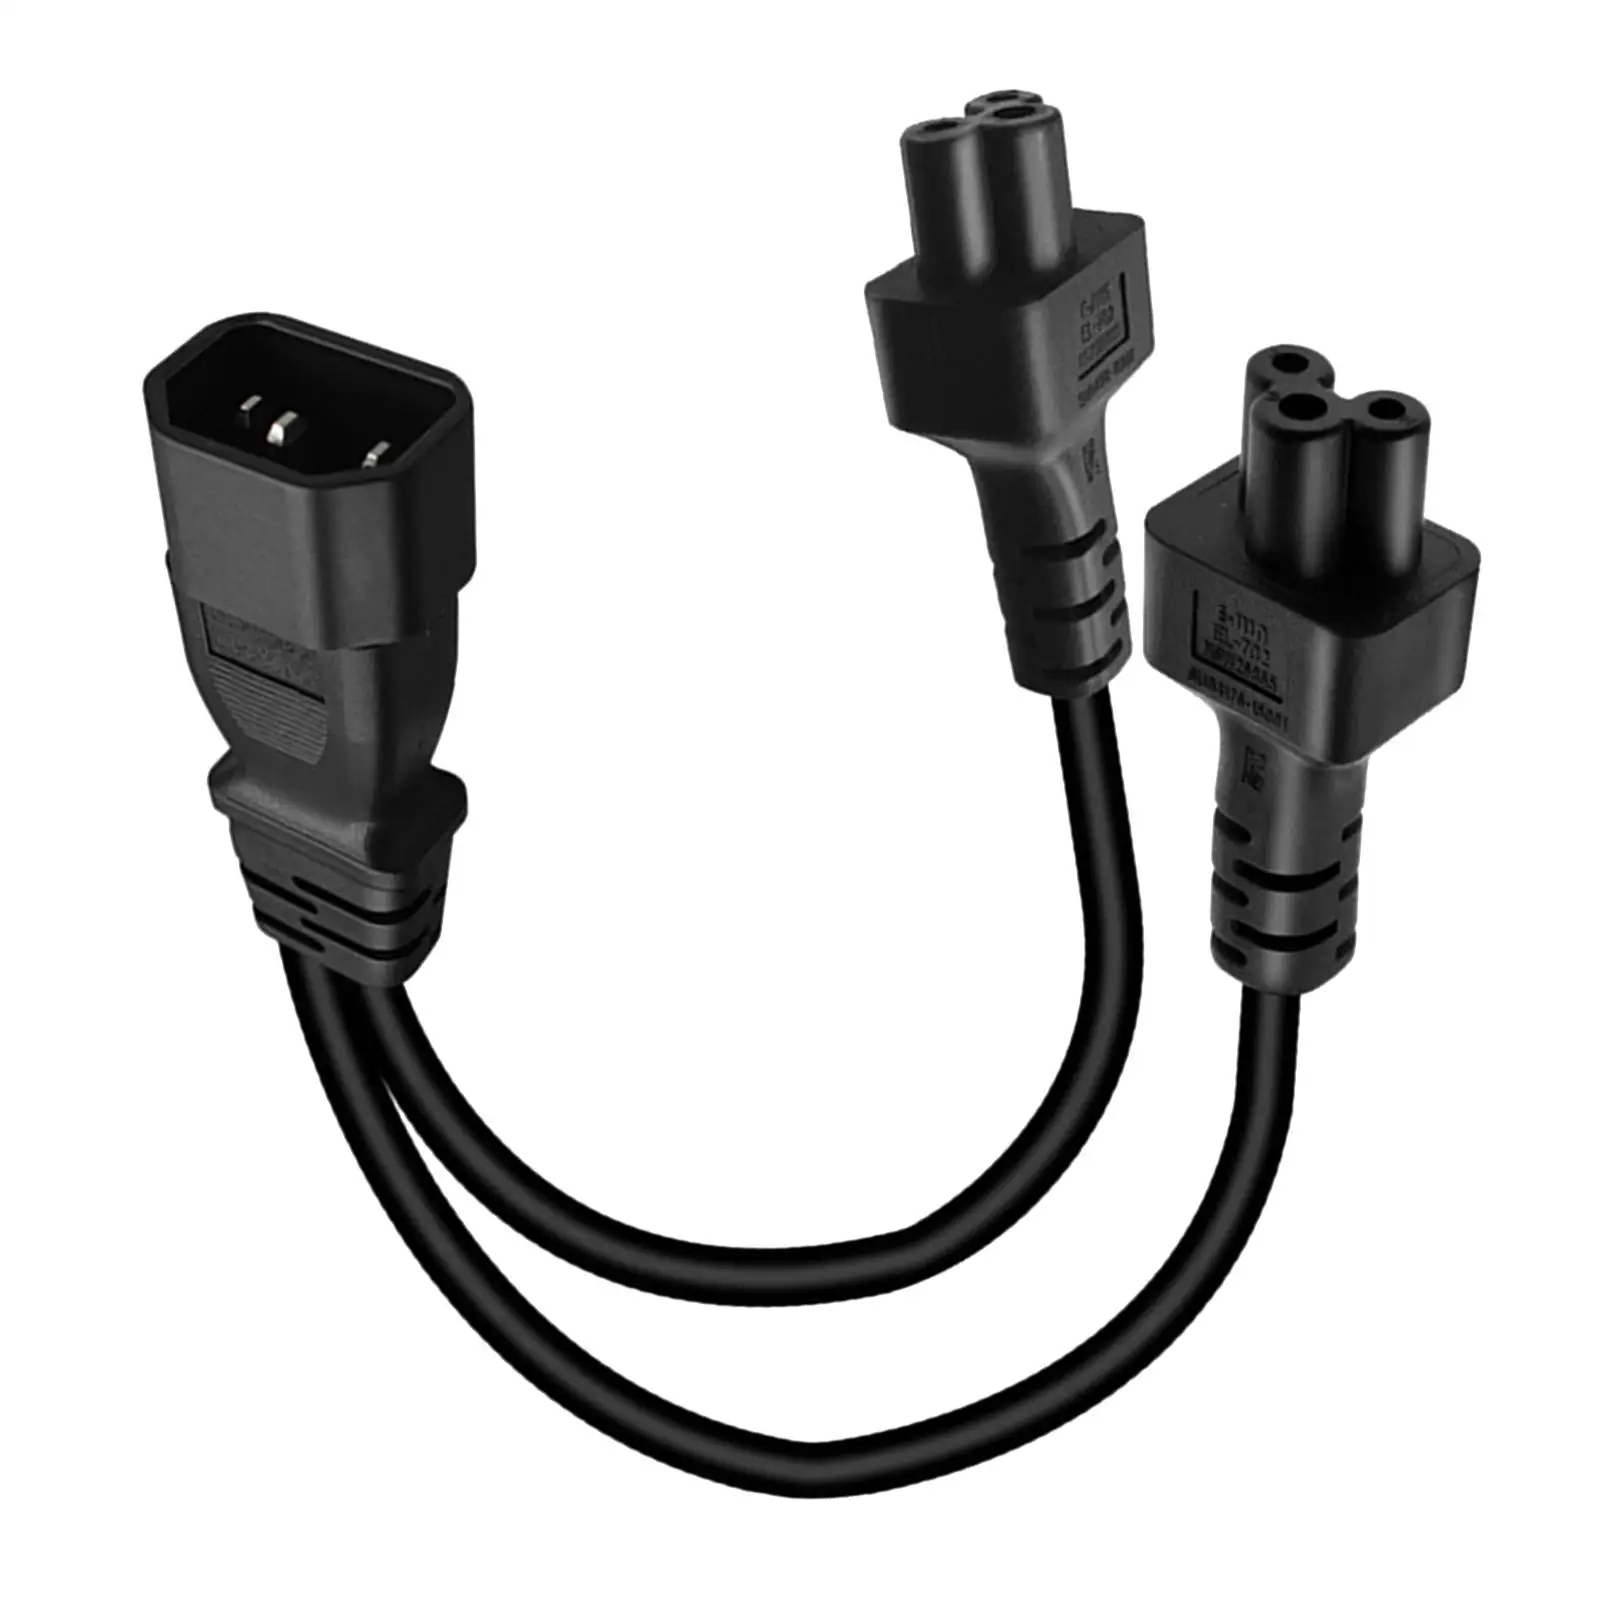 IEC320-C14 to IEC320 Dual C5 Splitter Power Cable Replace Part Durable Power Cable Cord Splitter for Monitor computers Computer